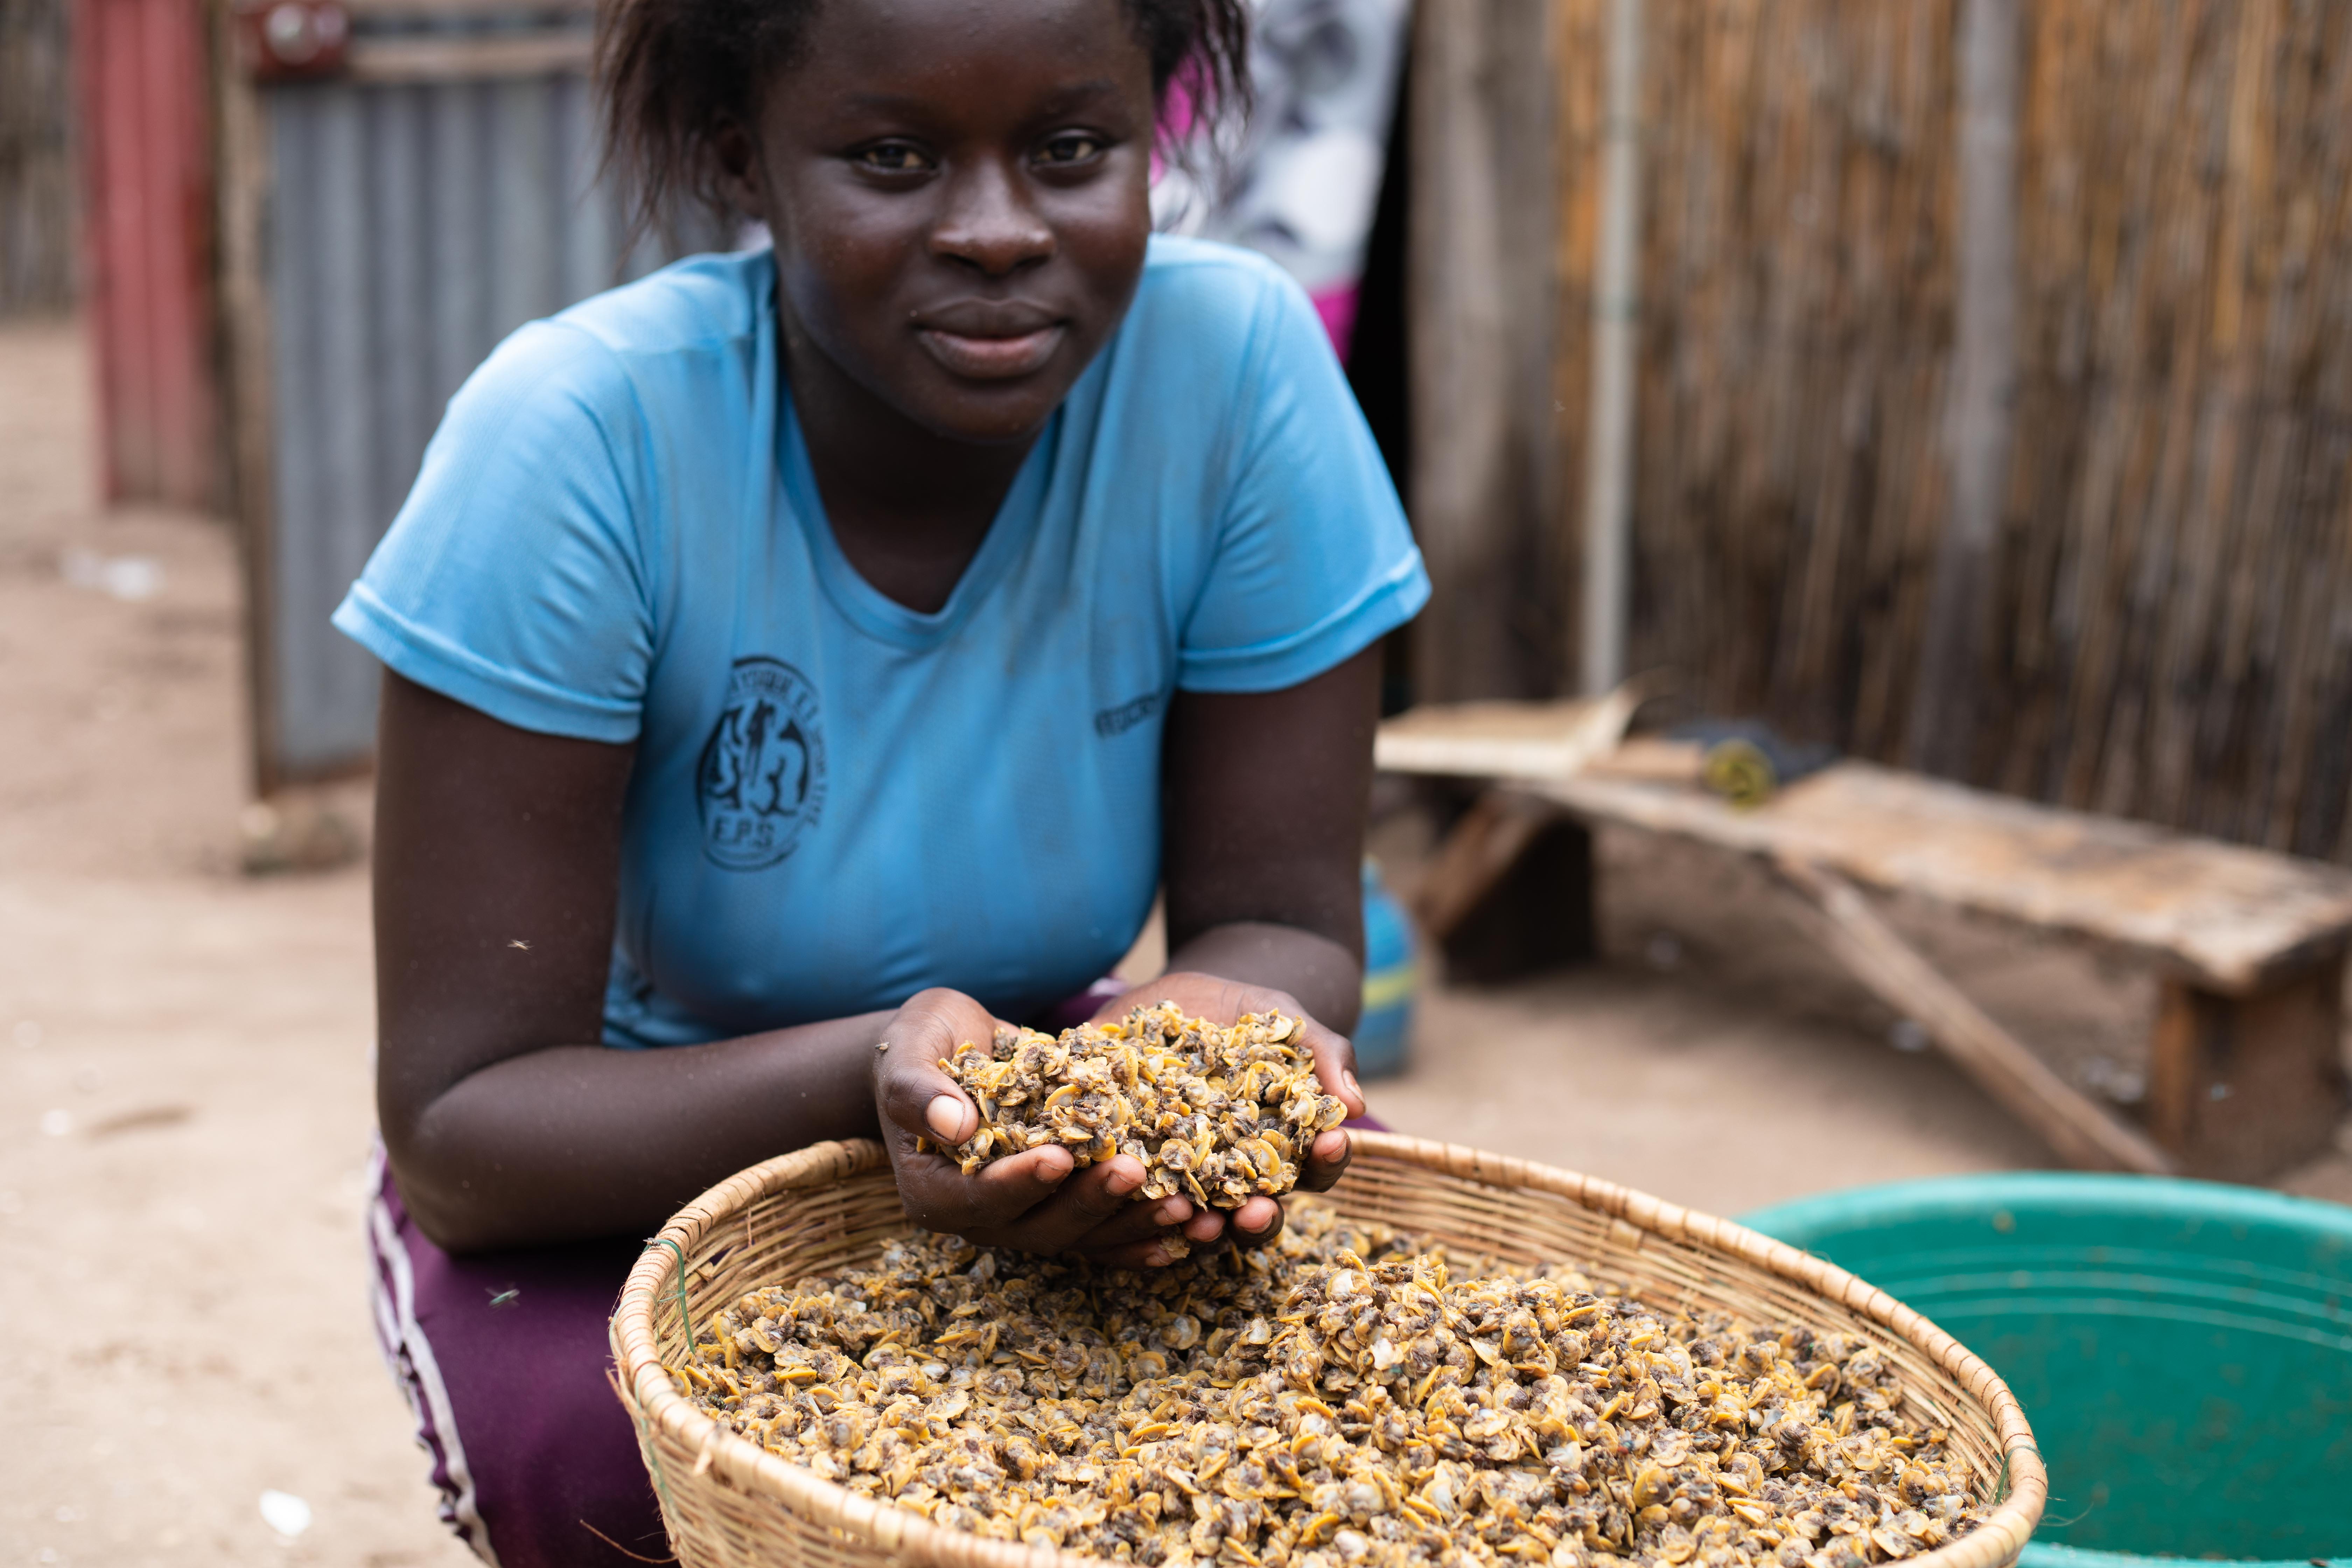 Coumba Manka, 19, a fish processor, holds cockles that have been removed from their shell at a community in Joal-Fadiouth